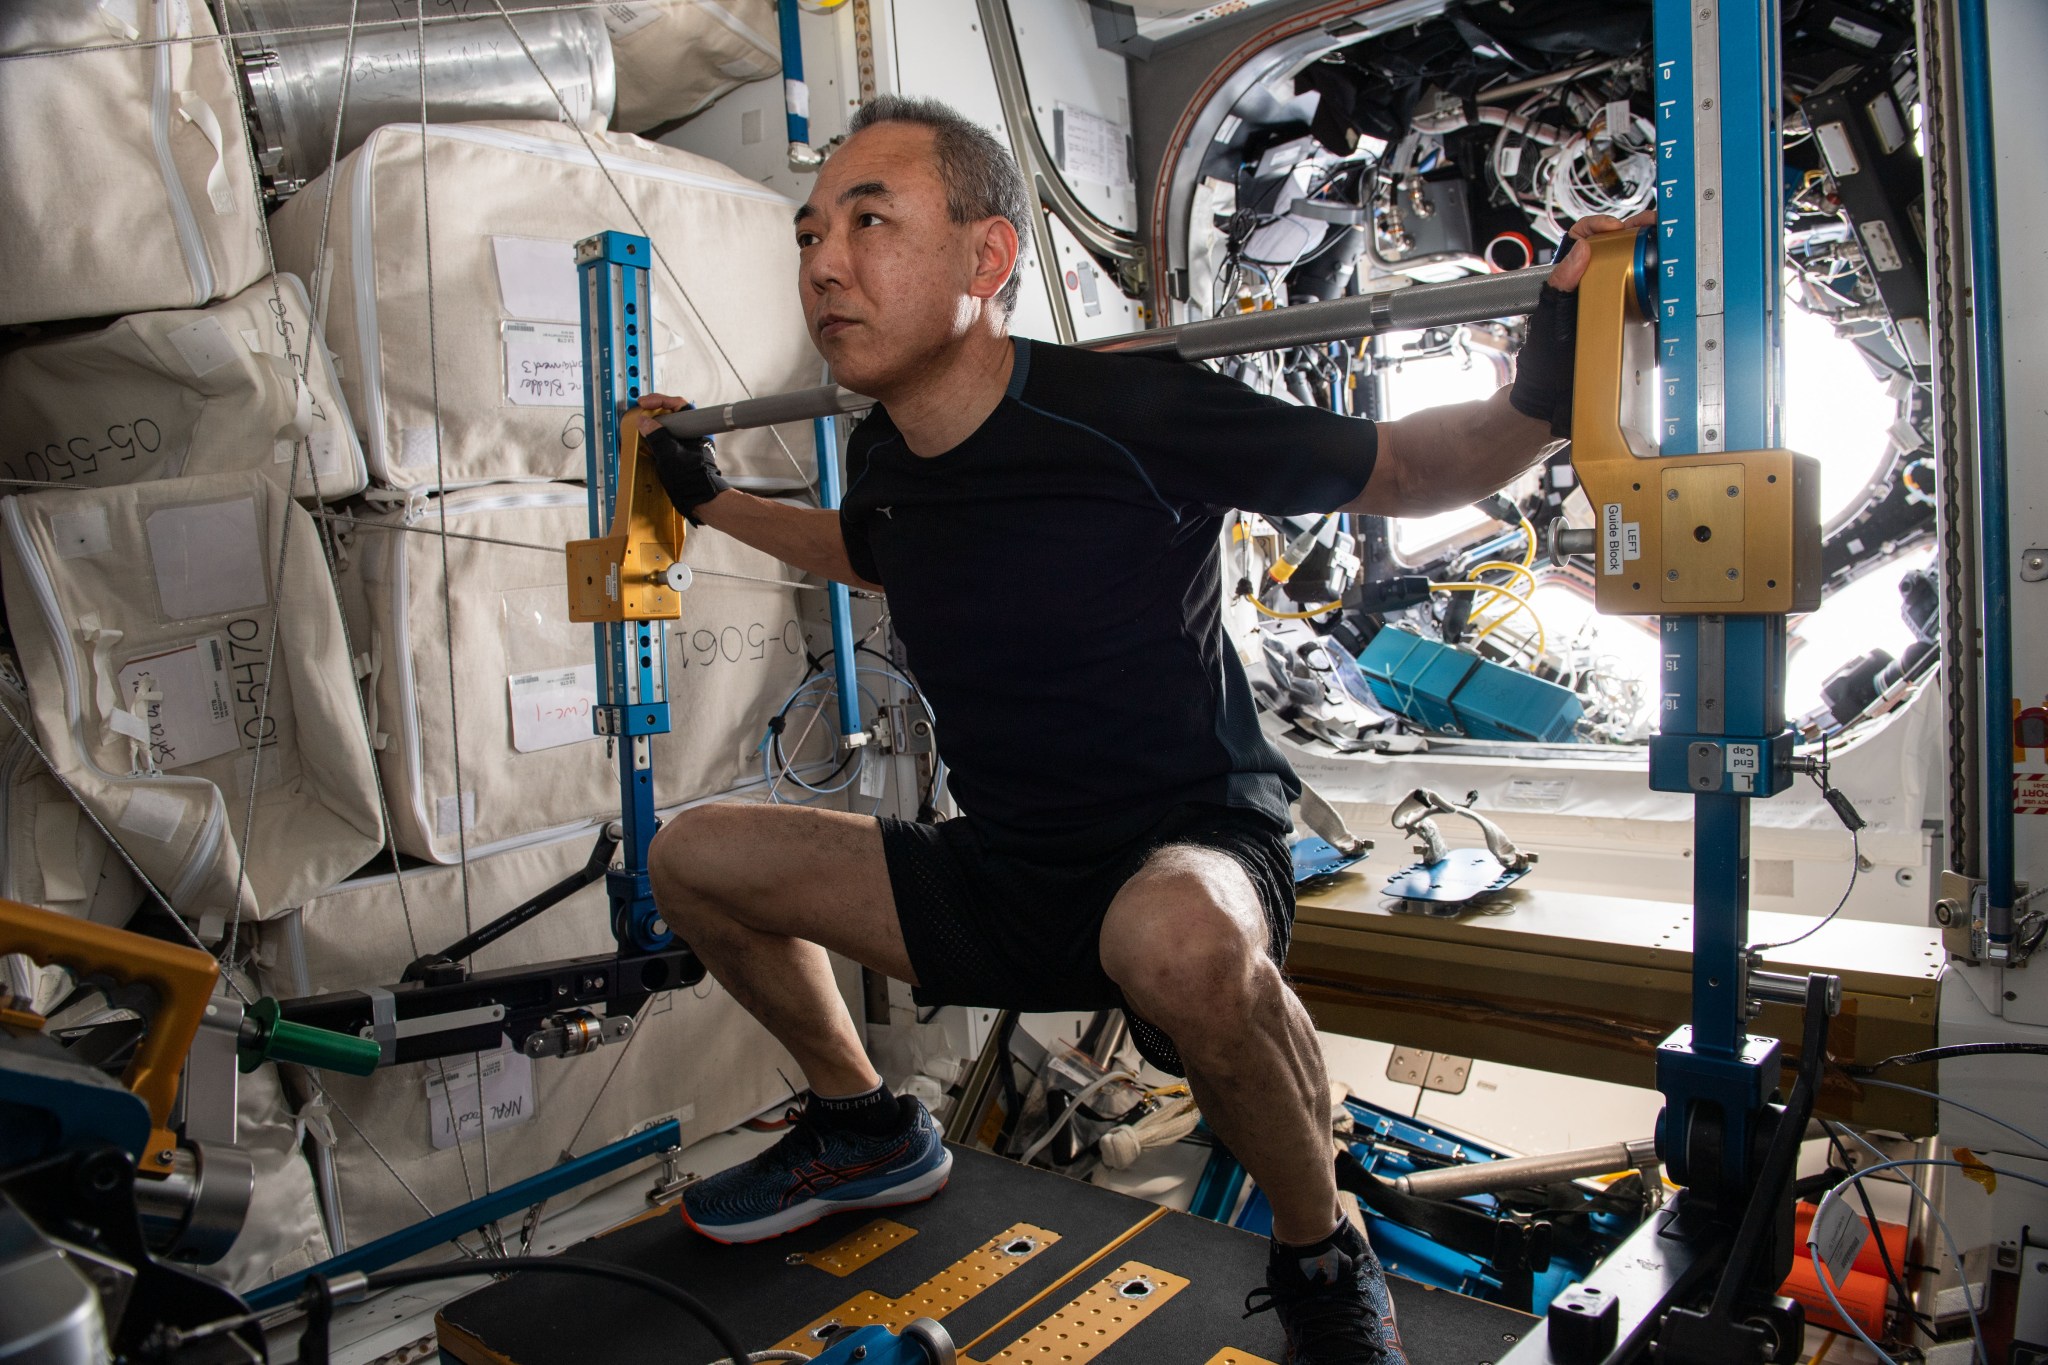 Expedition 70 Flight Engineer and JAXA (Japan Aerospace Exploration Agency) astronaut Satoshi Furukawa works out on the Advanced Resisitive Exercise Device located (ARED) in the International Space Station's Tranquility module. The ARED is designed to mimic the inertial forces generated when lifting free weights on Earth.